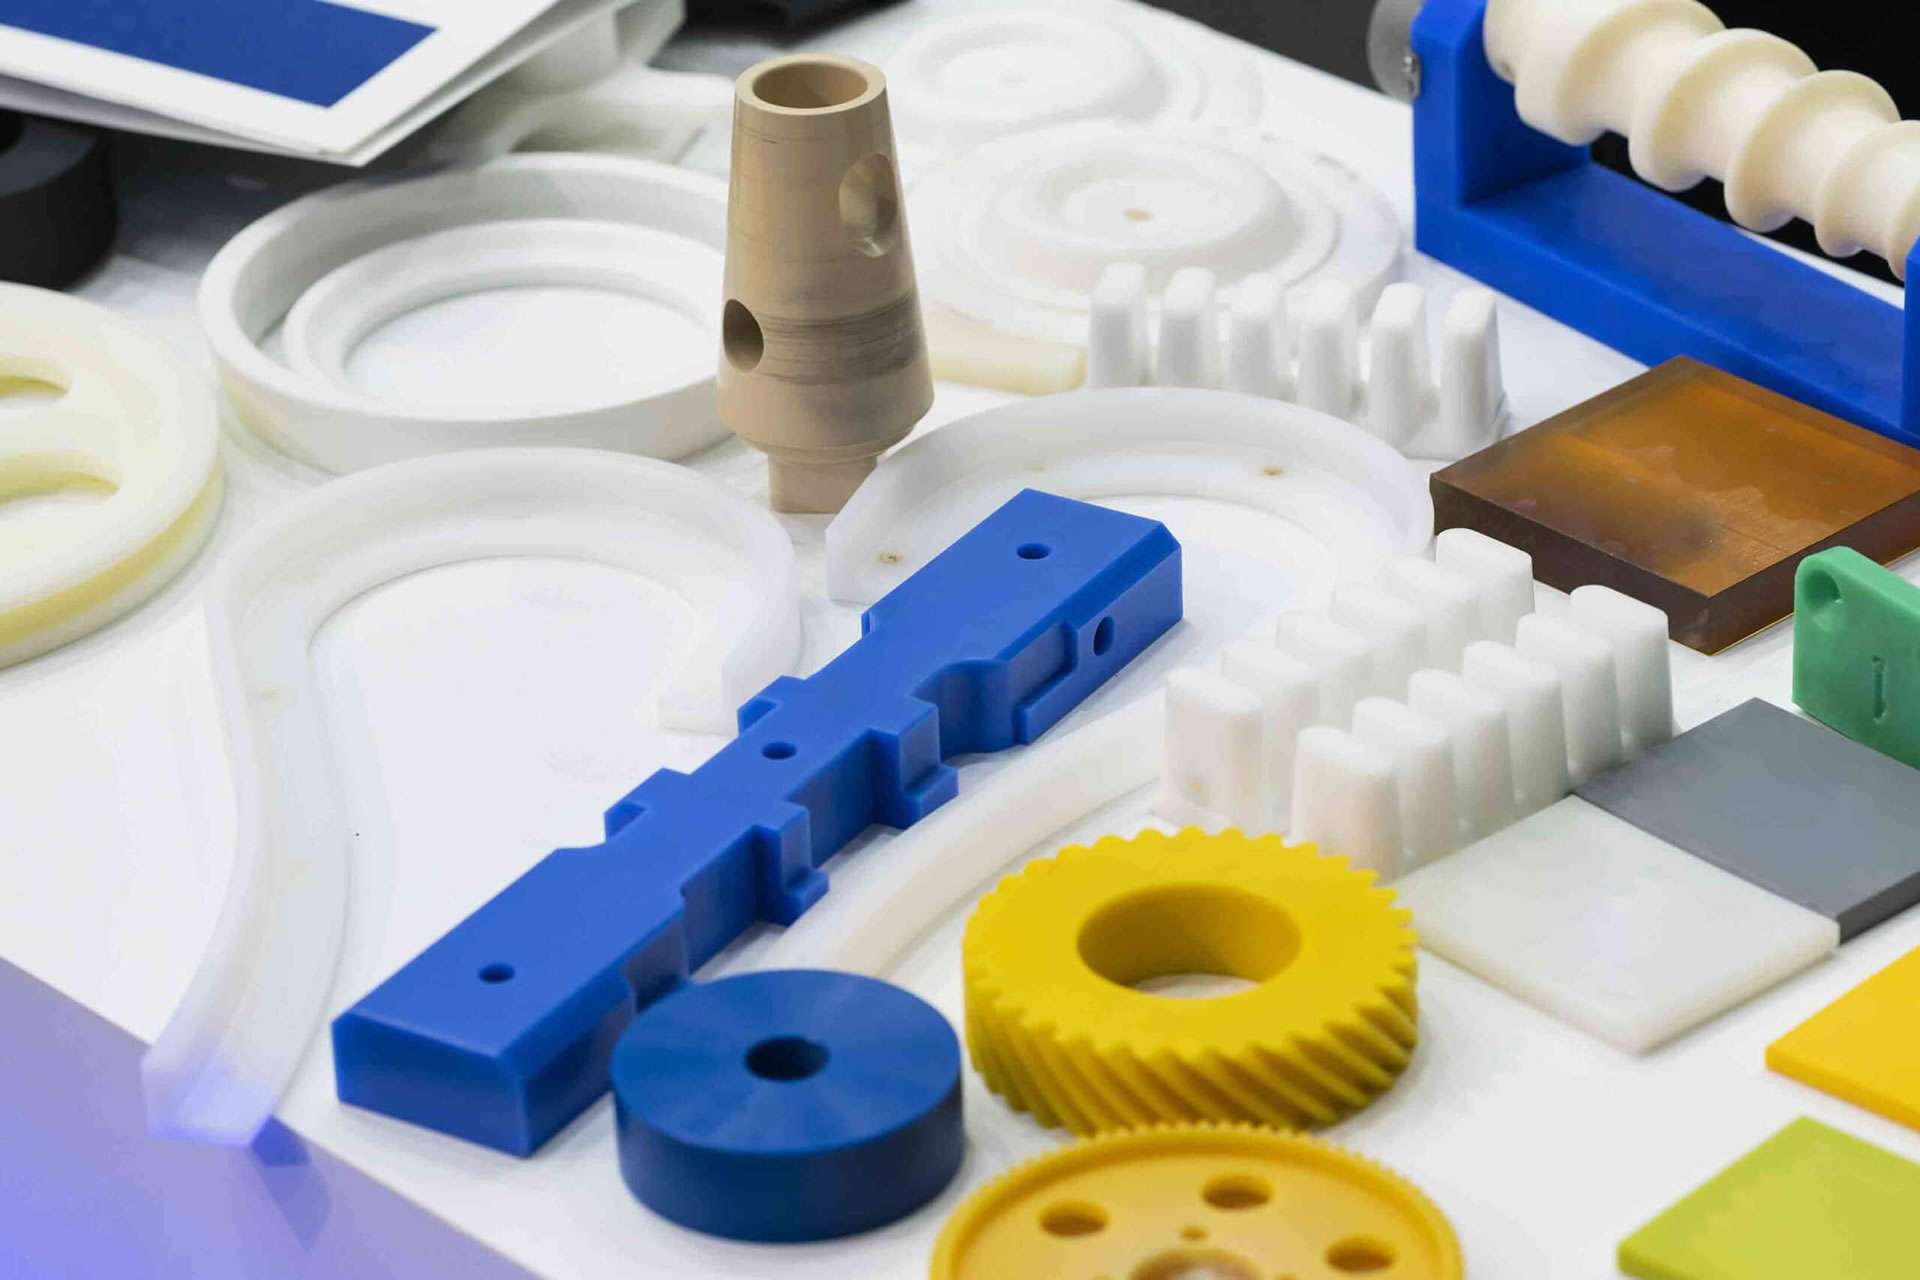 Injection moulded plastic components suppliers